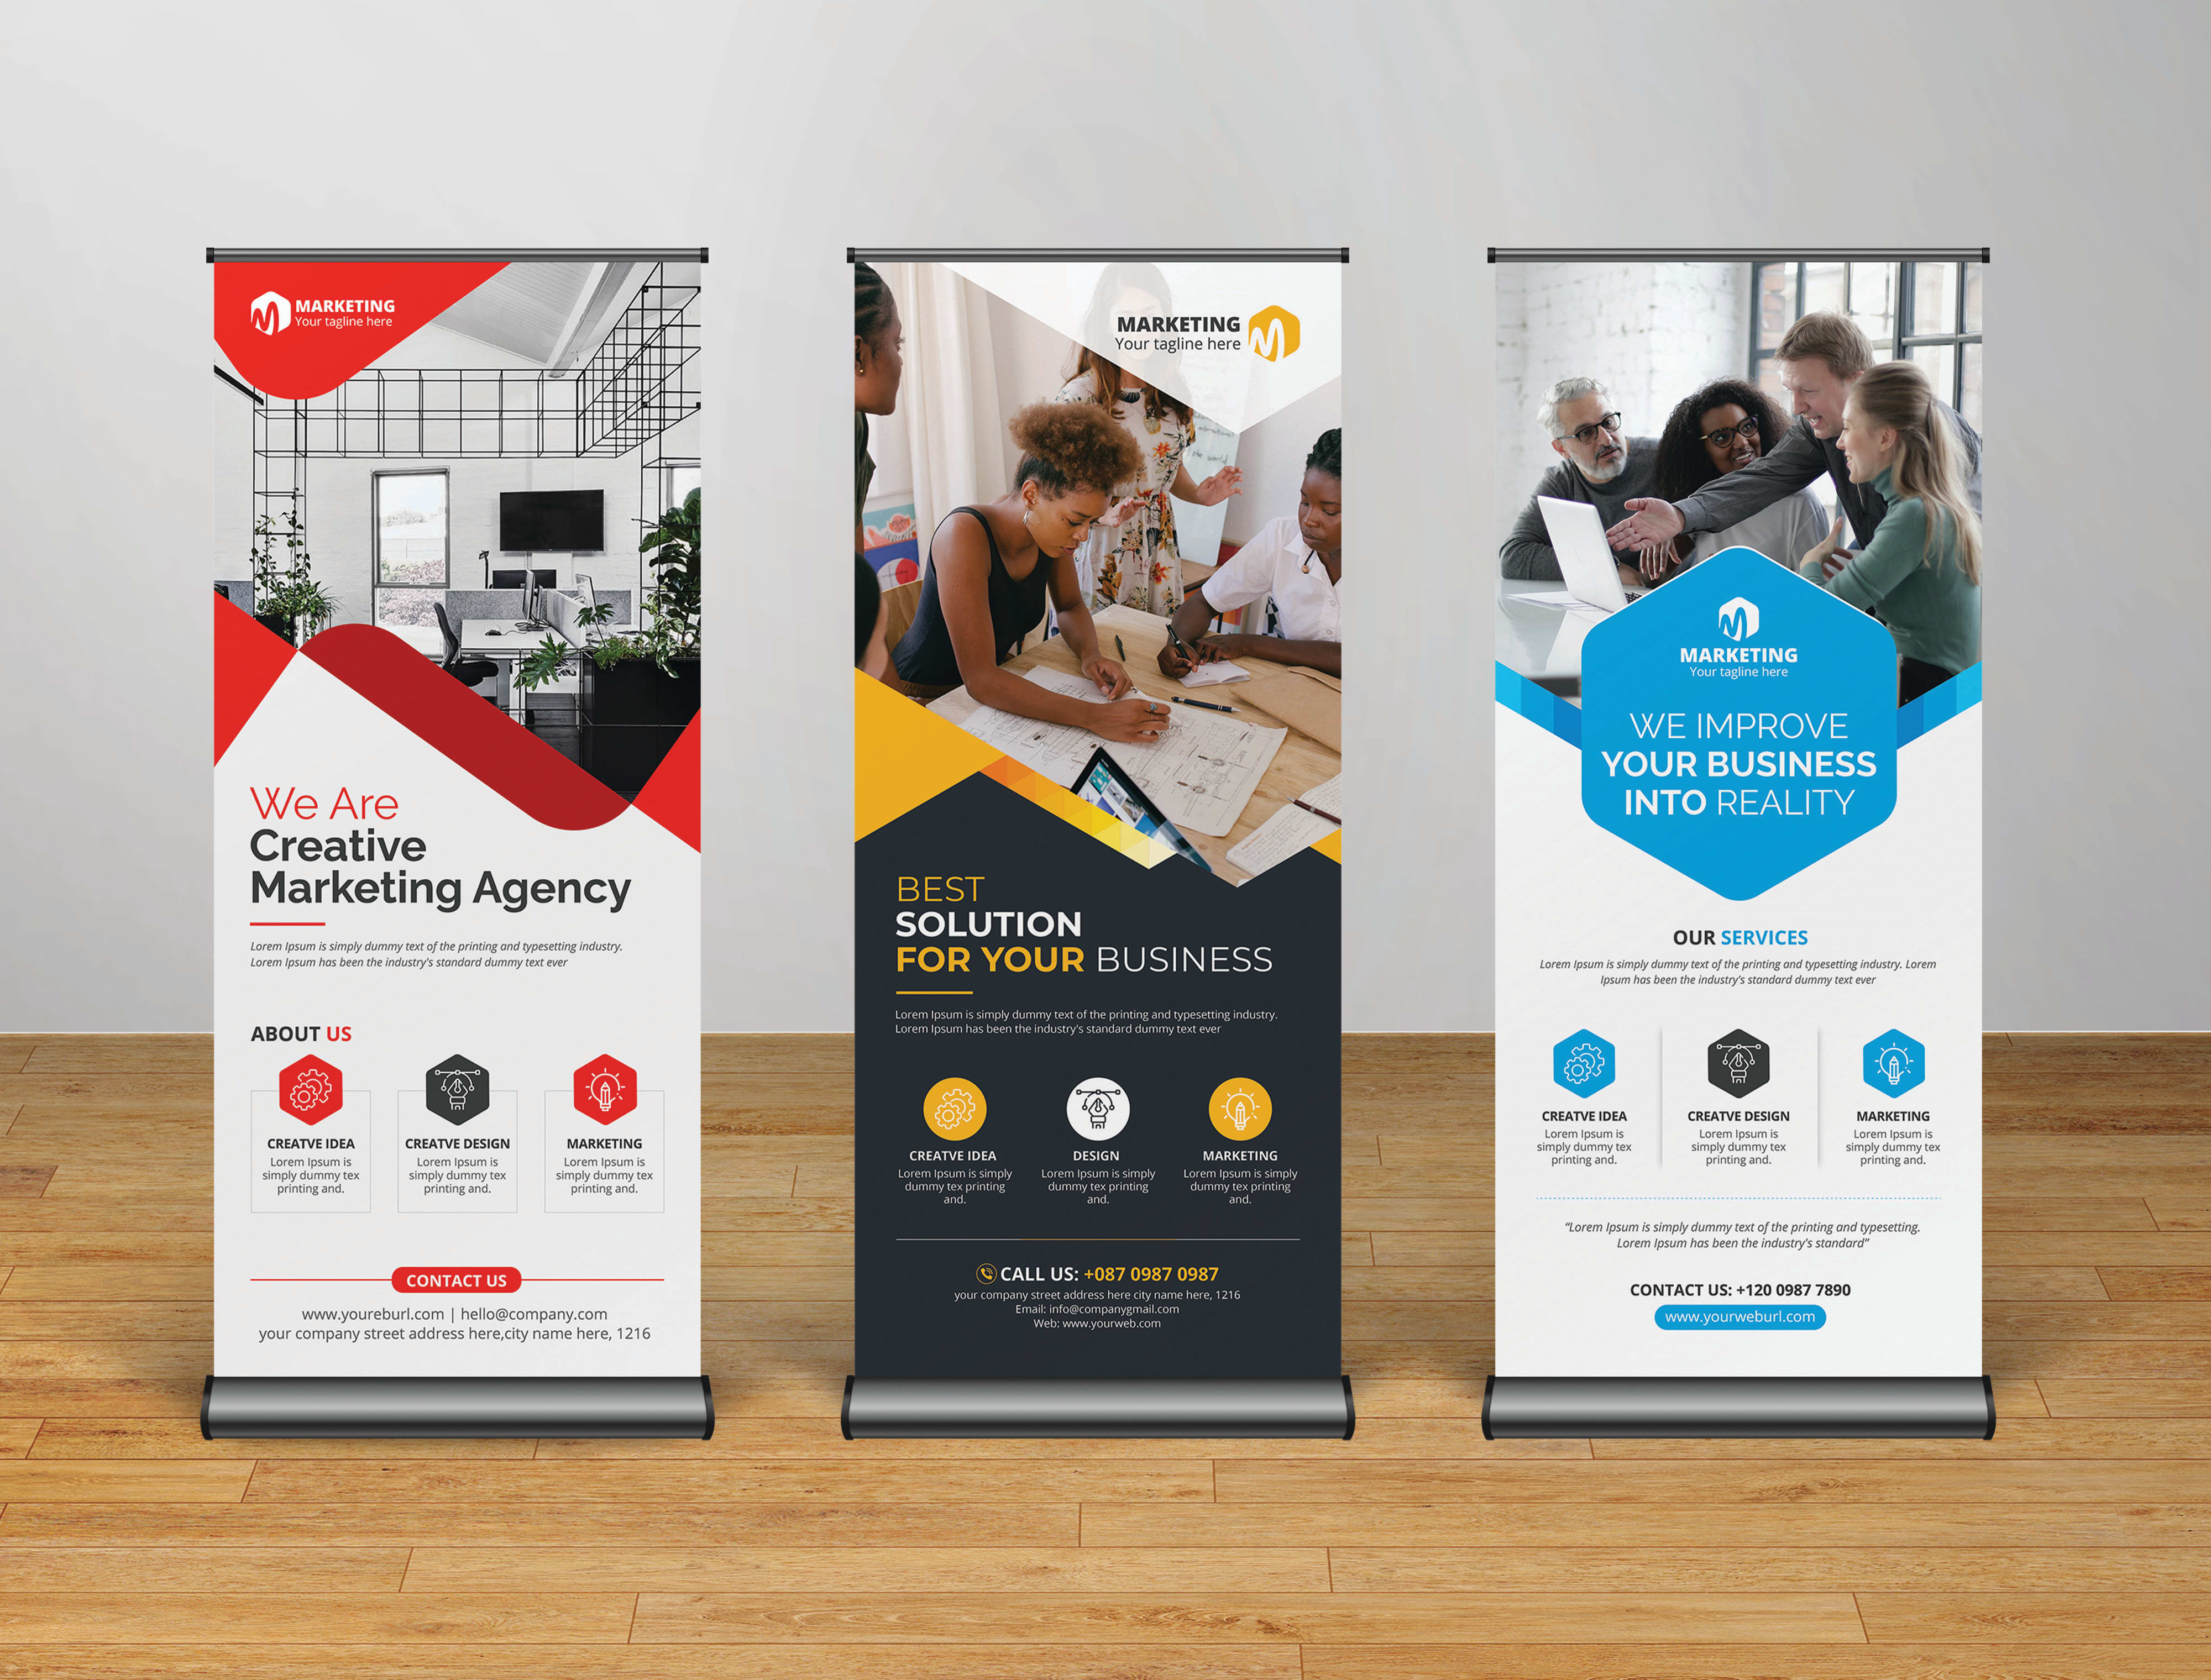 Design a rollup banner, pop up, event banner, banner ads by